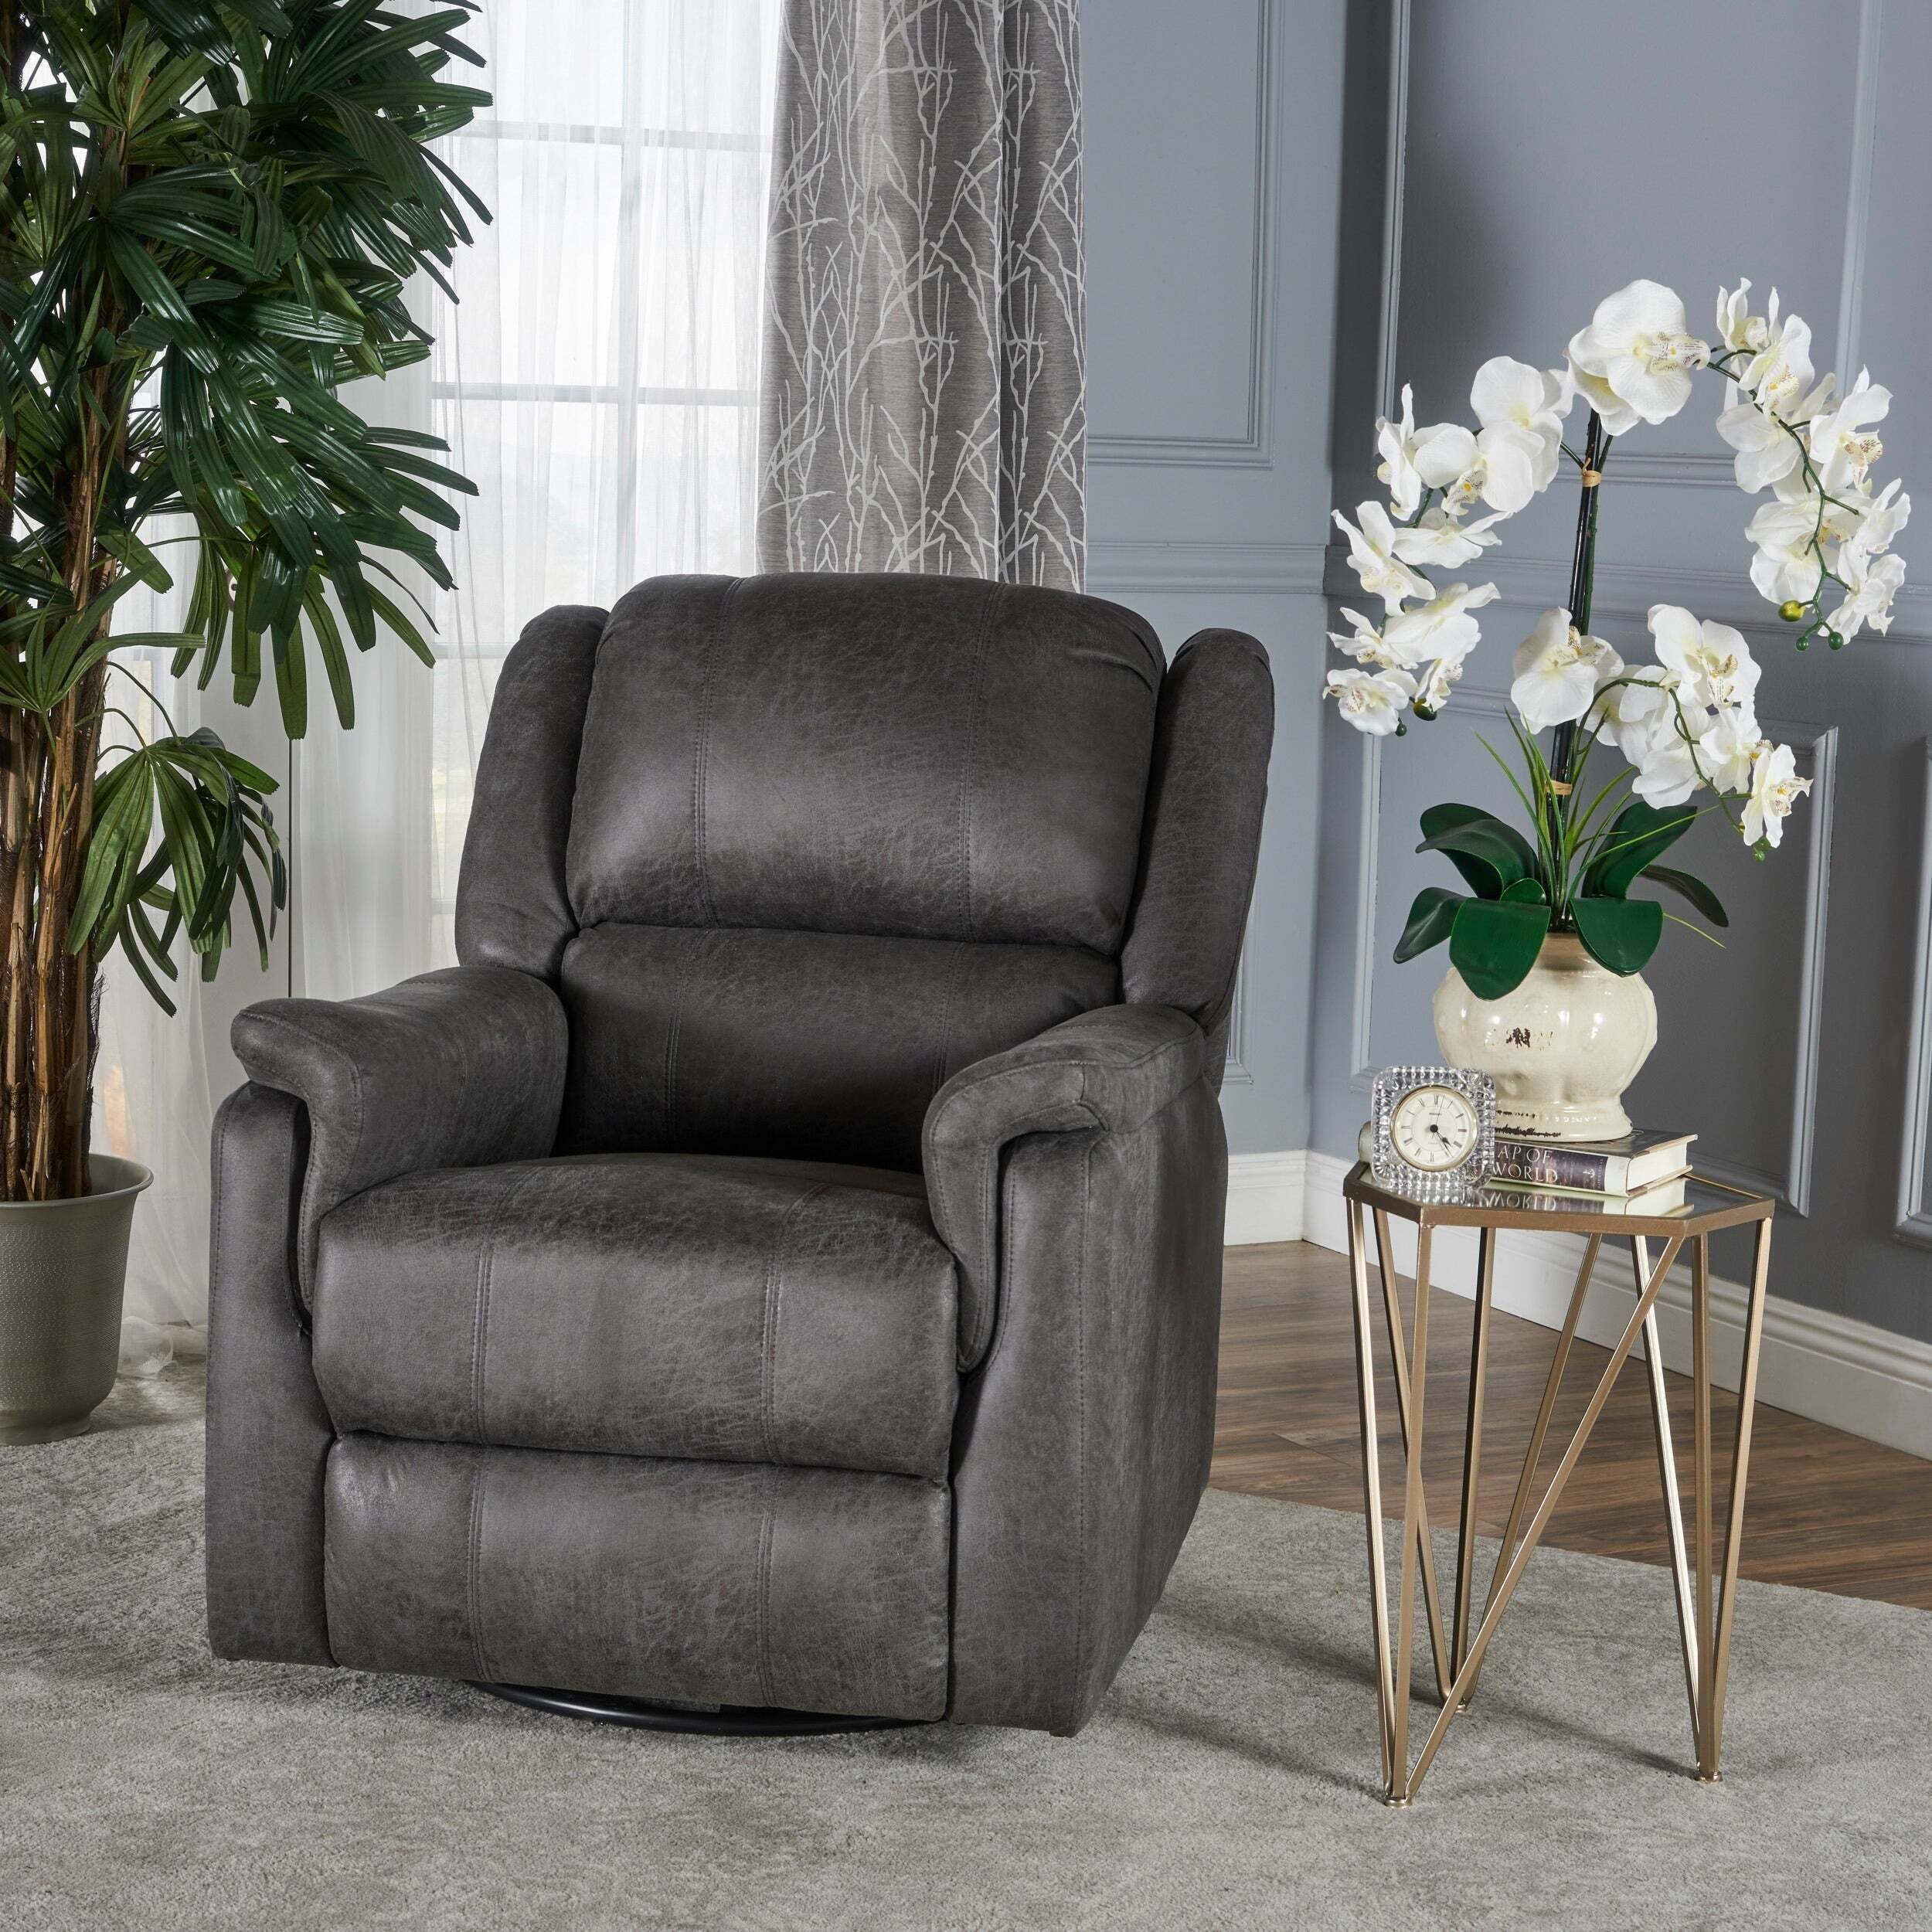 The overstuffed swivel chair of your dreams